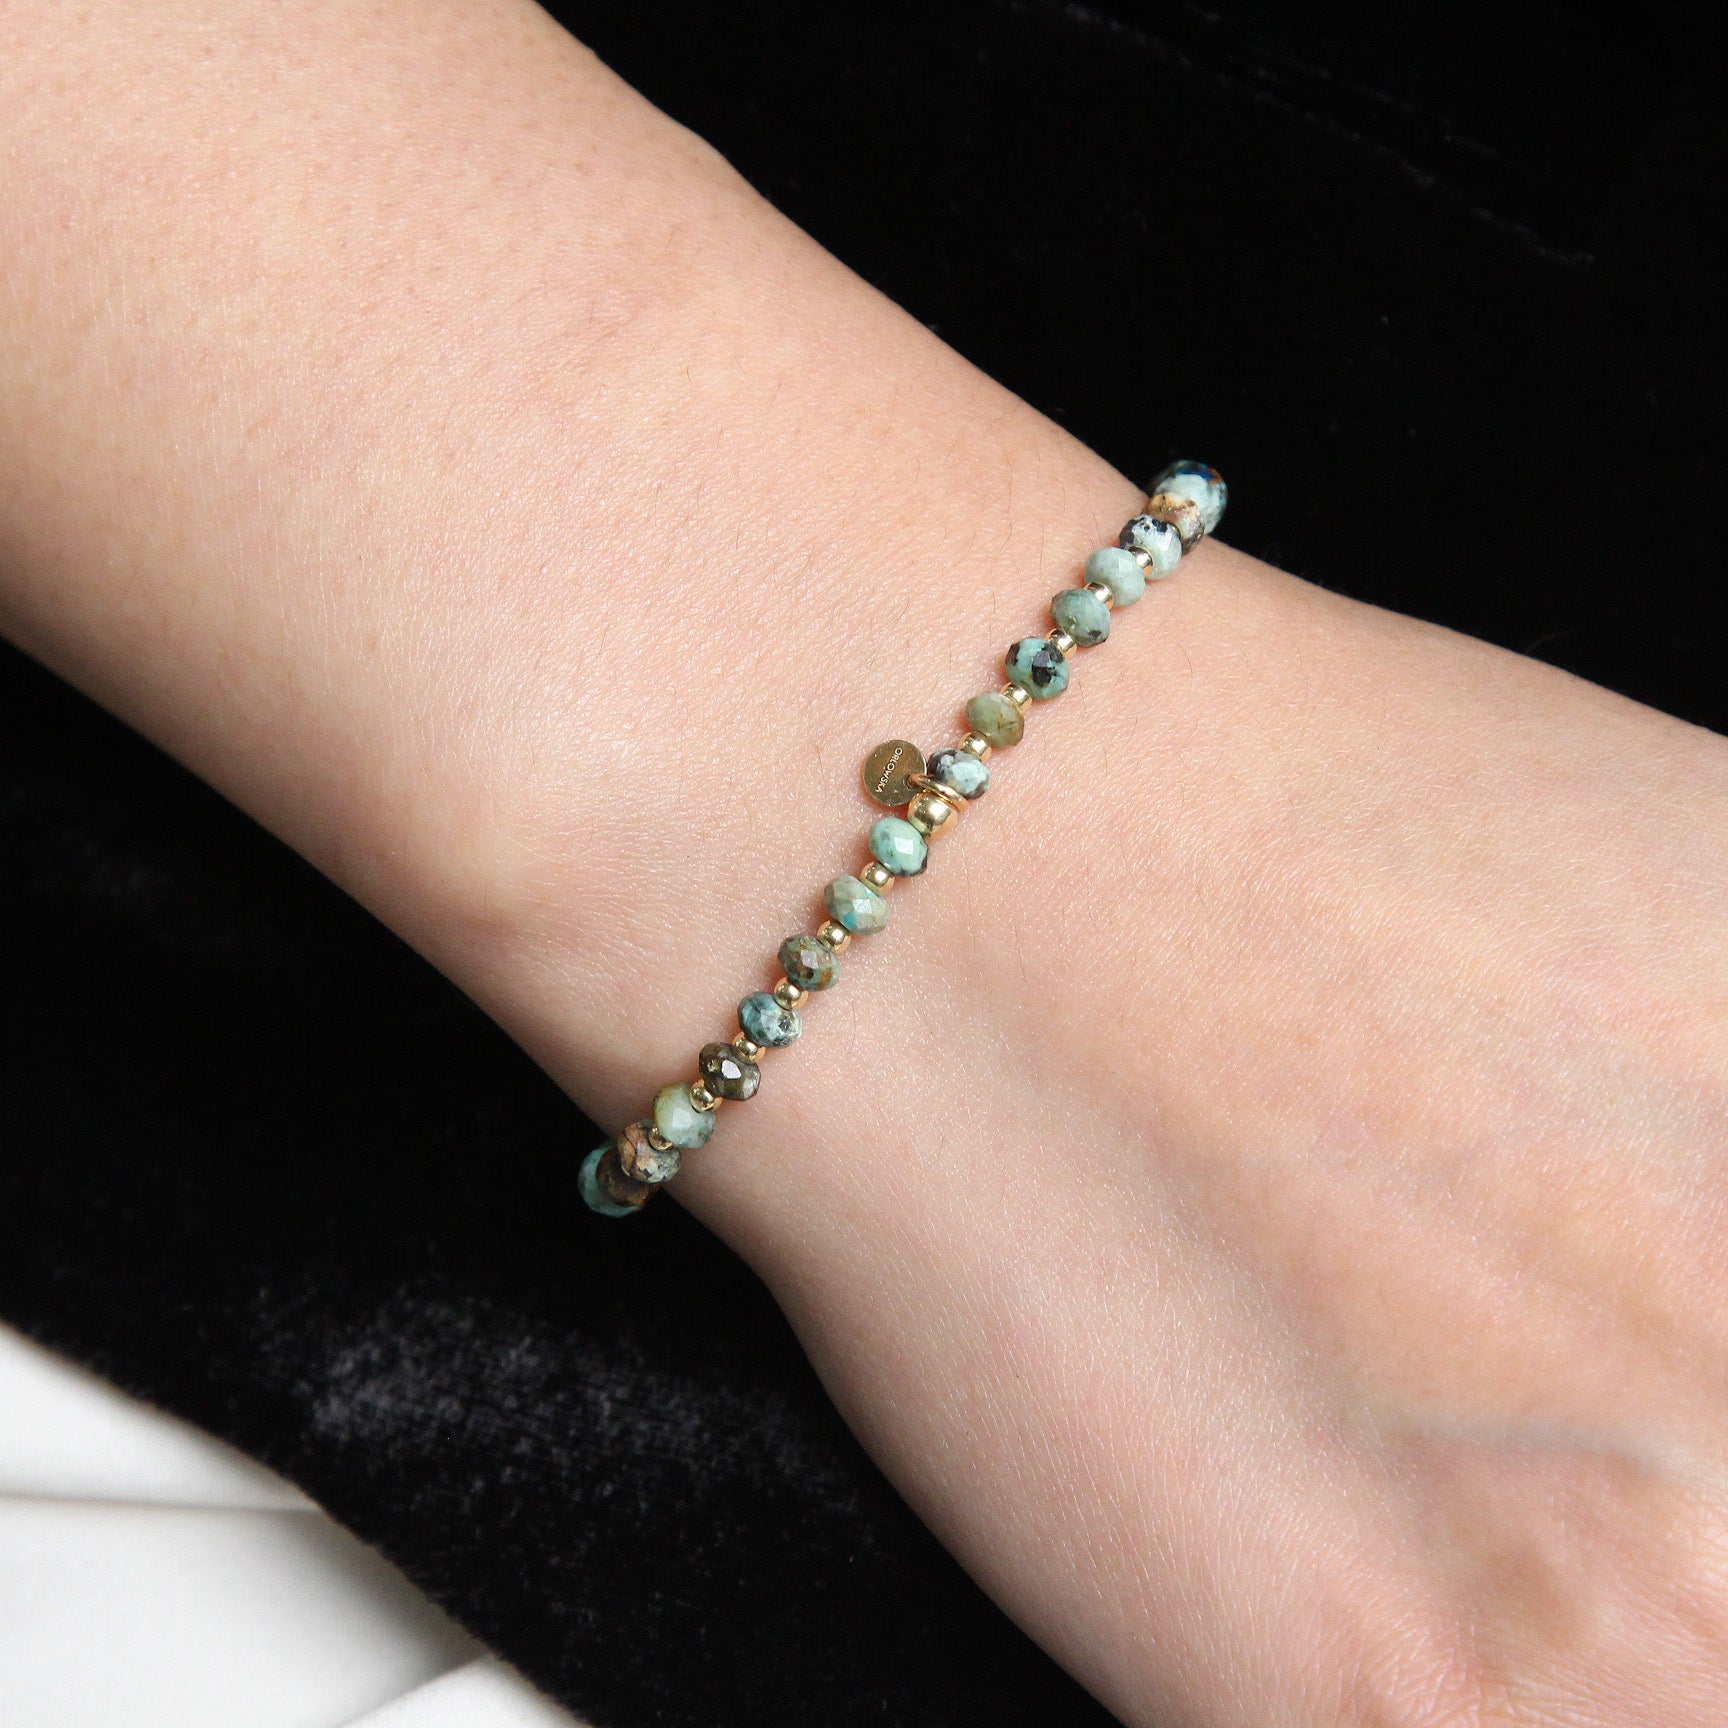 “Kate” African Turquoise Bracelet